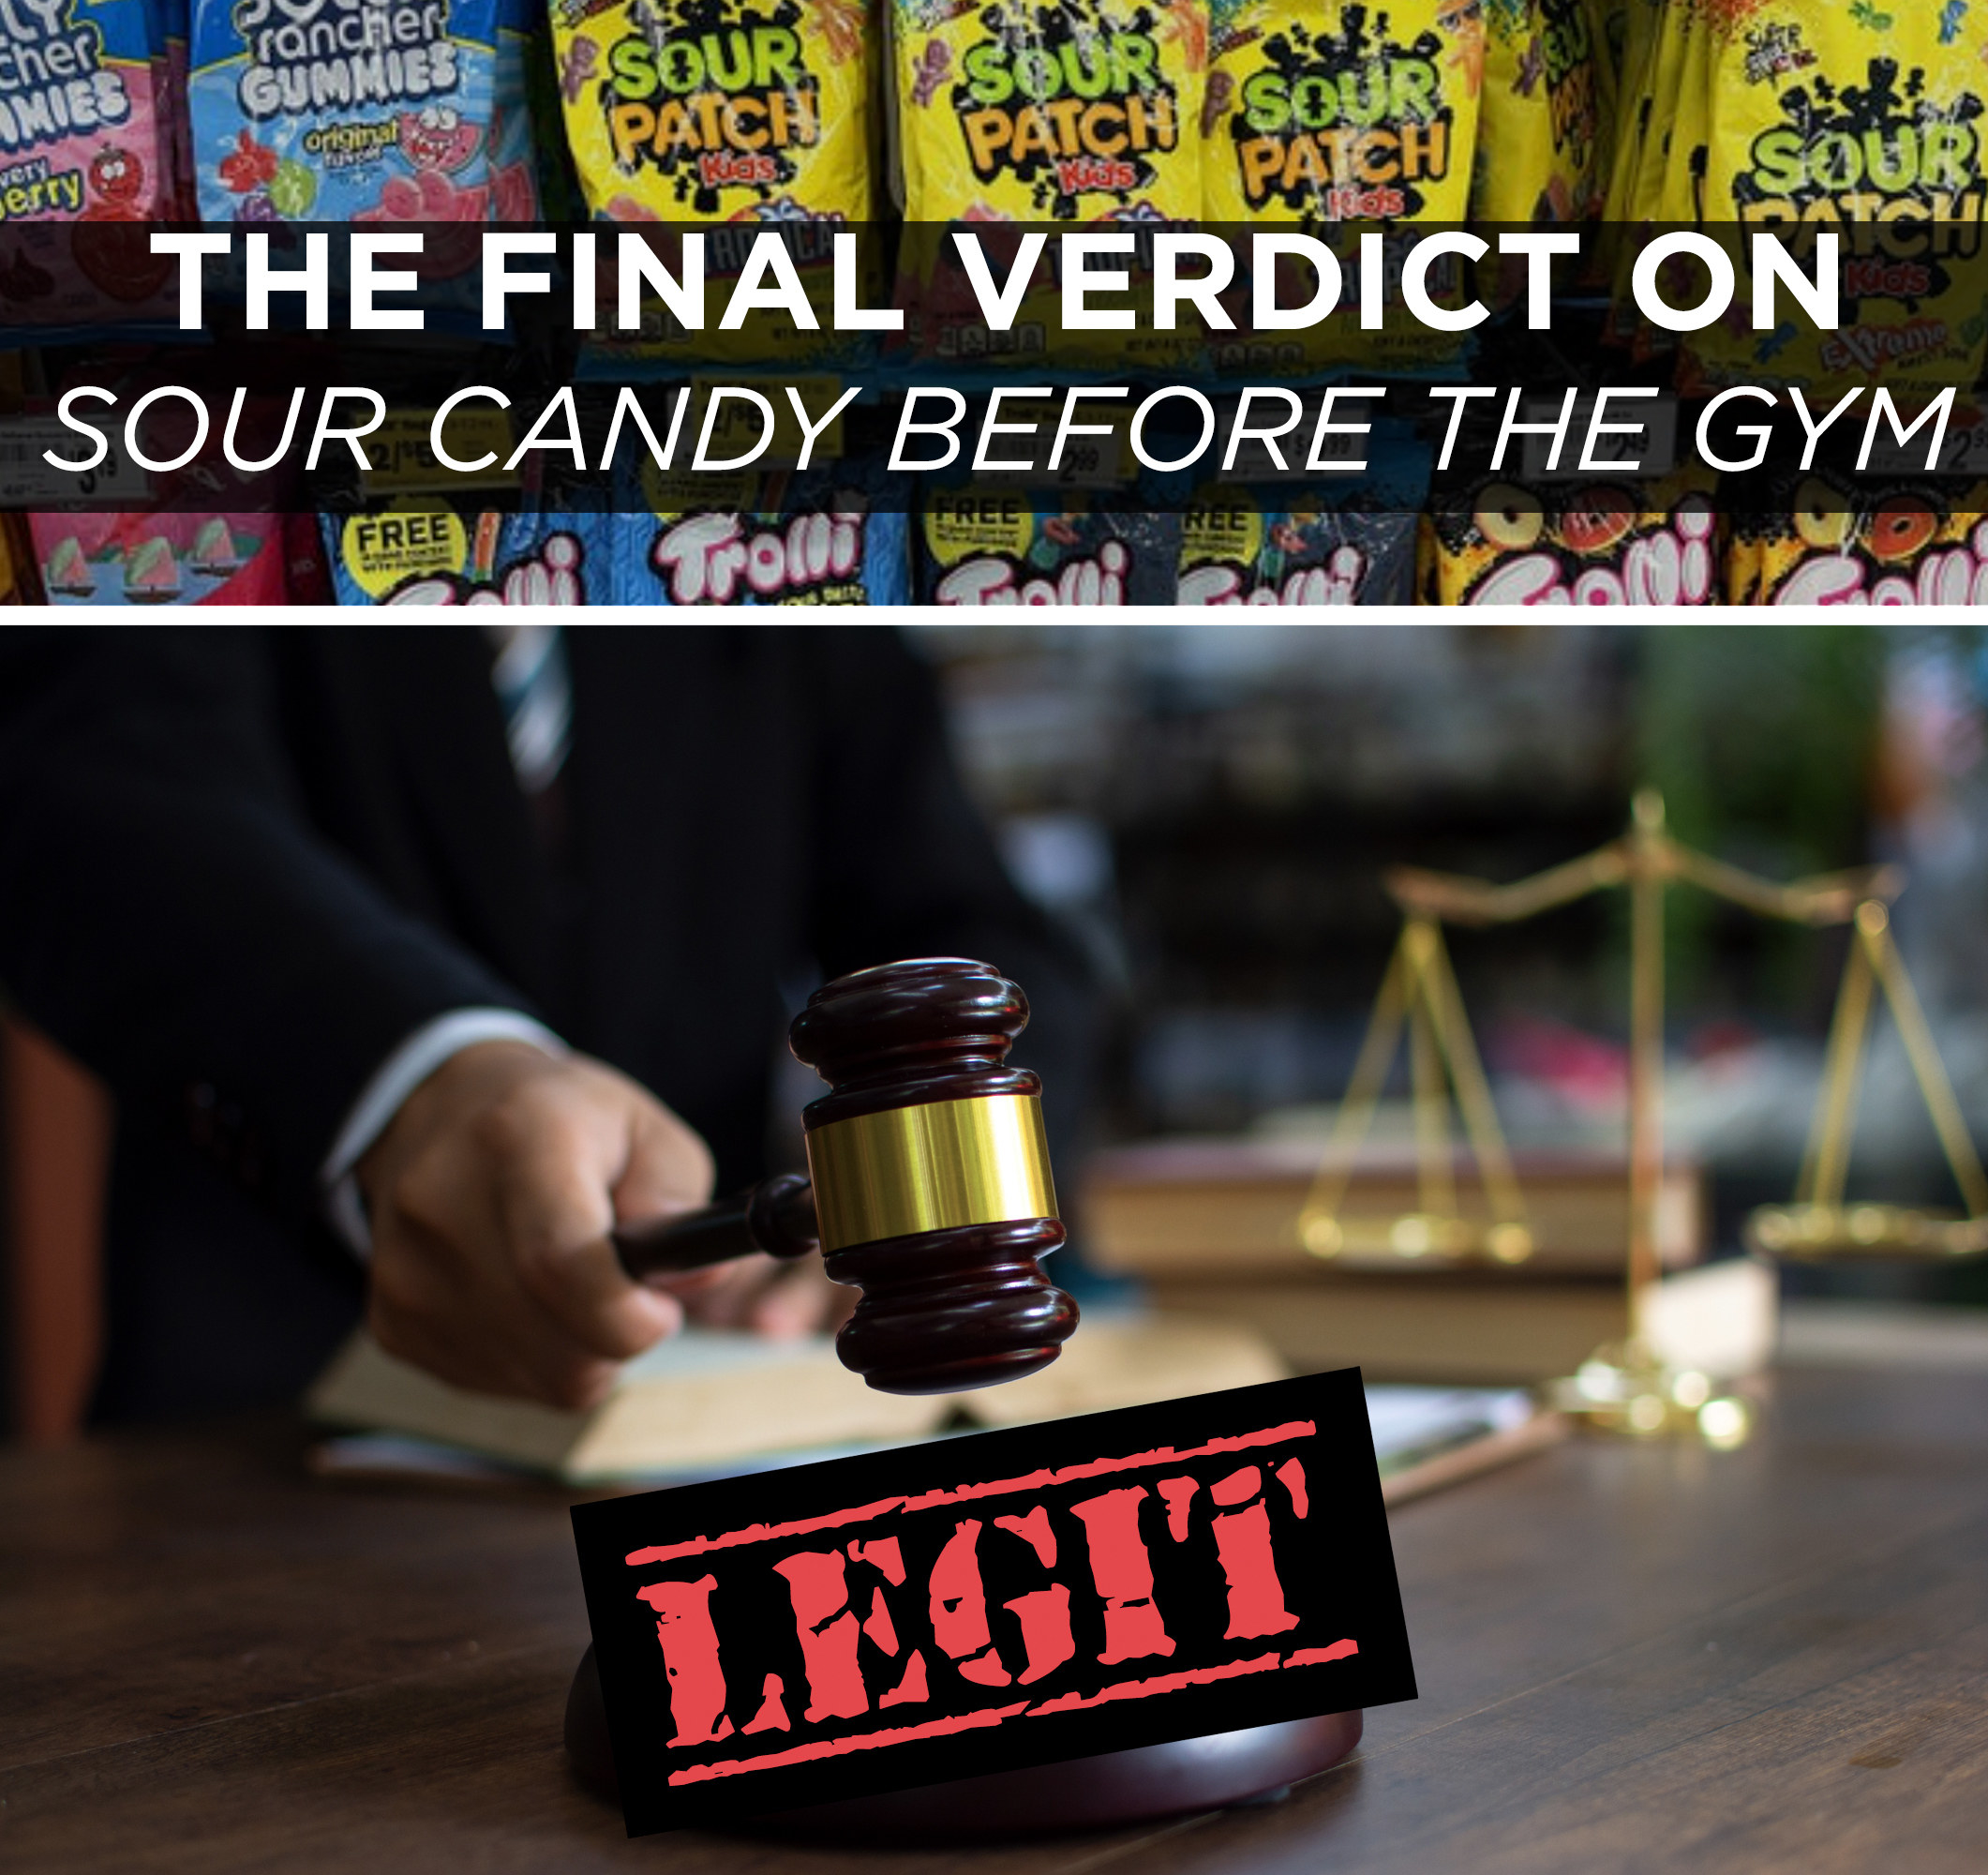 the candy aisle with the words &quot;the final verdict on sour candy before the gym&quot;; a person pounding a gavel in a courtroom with the word &quot;legit&quot;